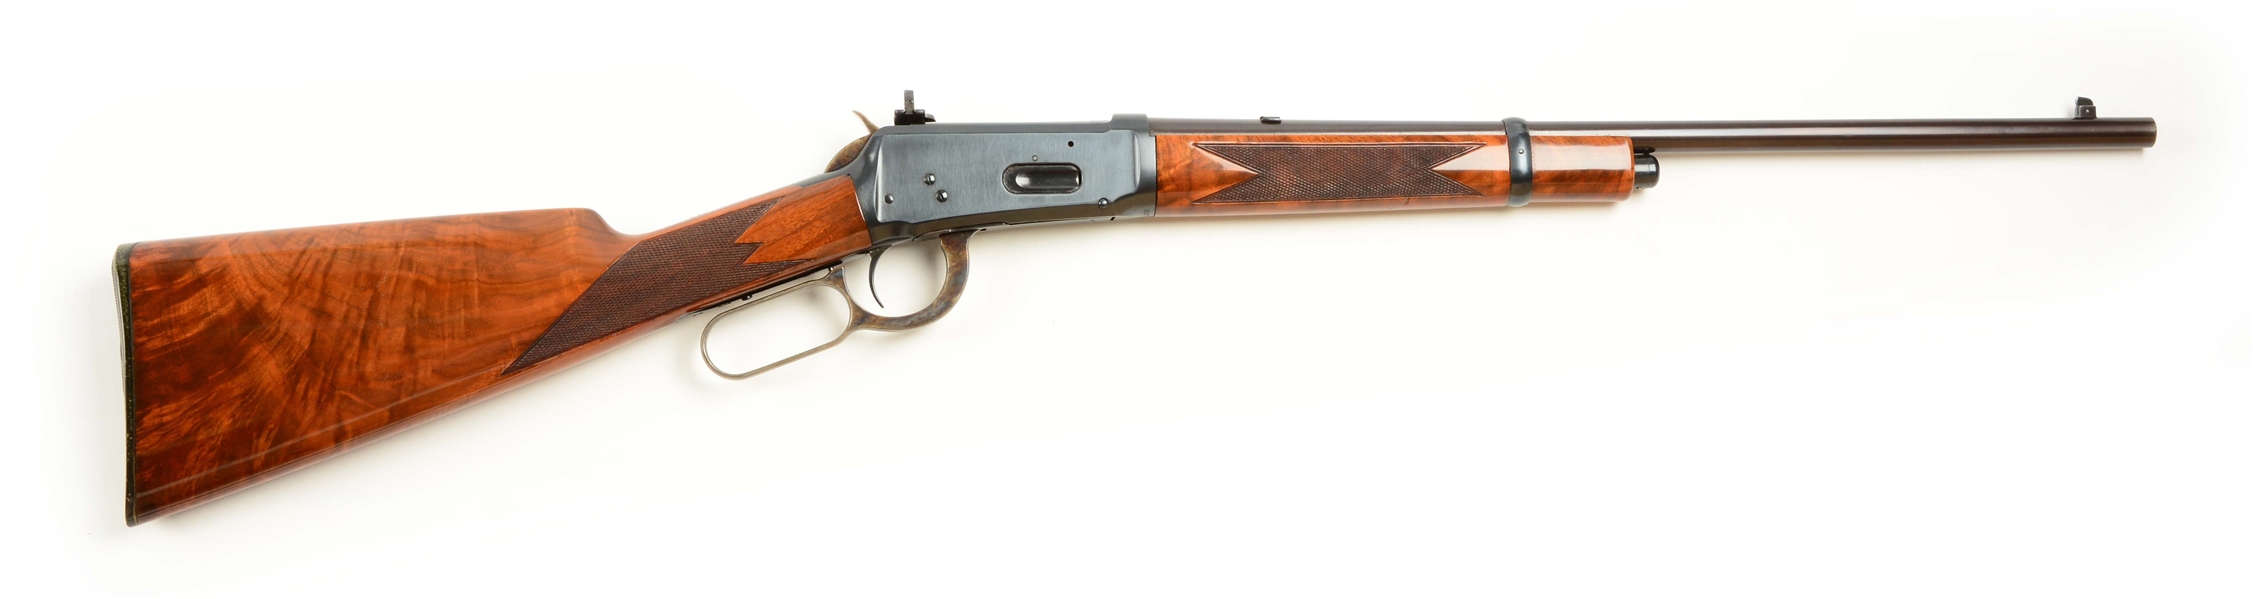 (C) NEAR NEW DELUXE WINCHESTER MODEL 1894 LEVER ACTION CARBINE (1912).